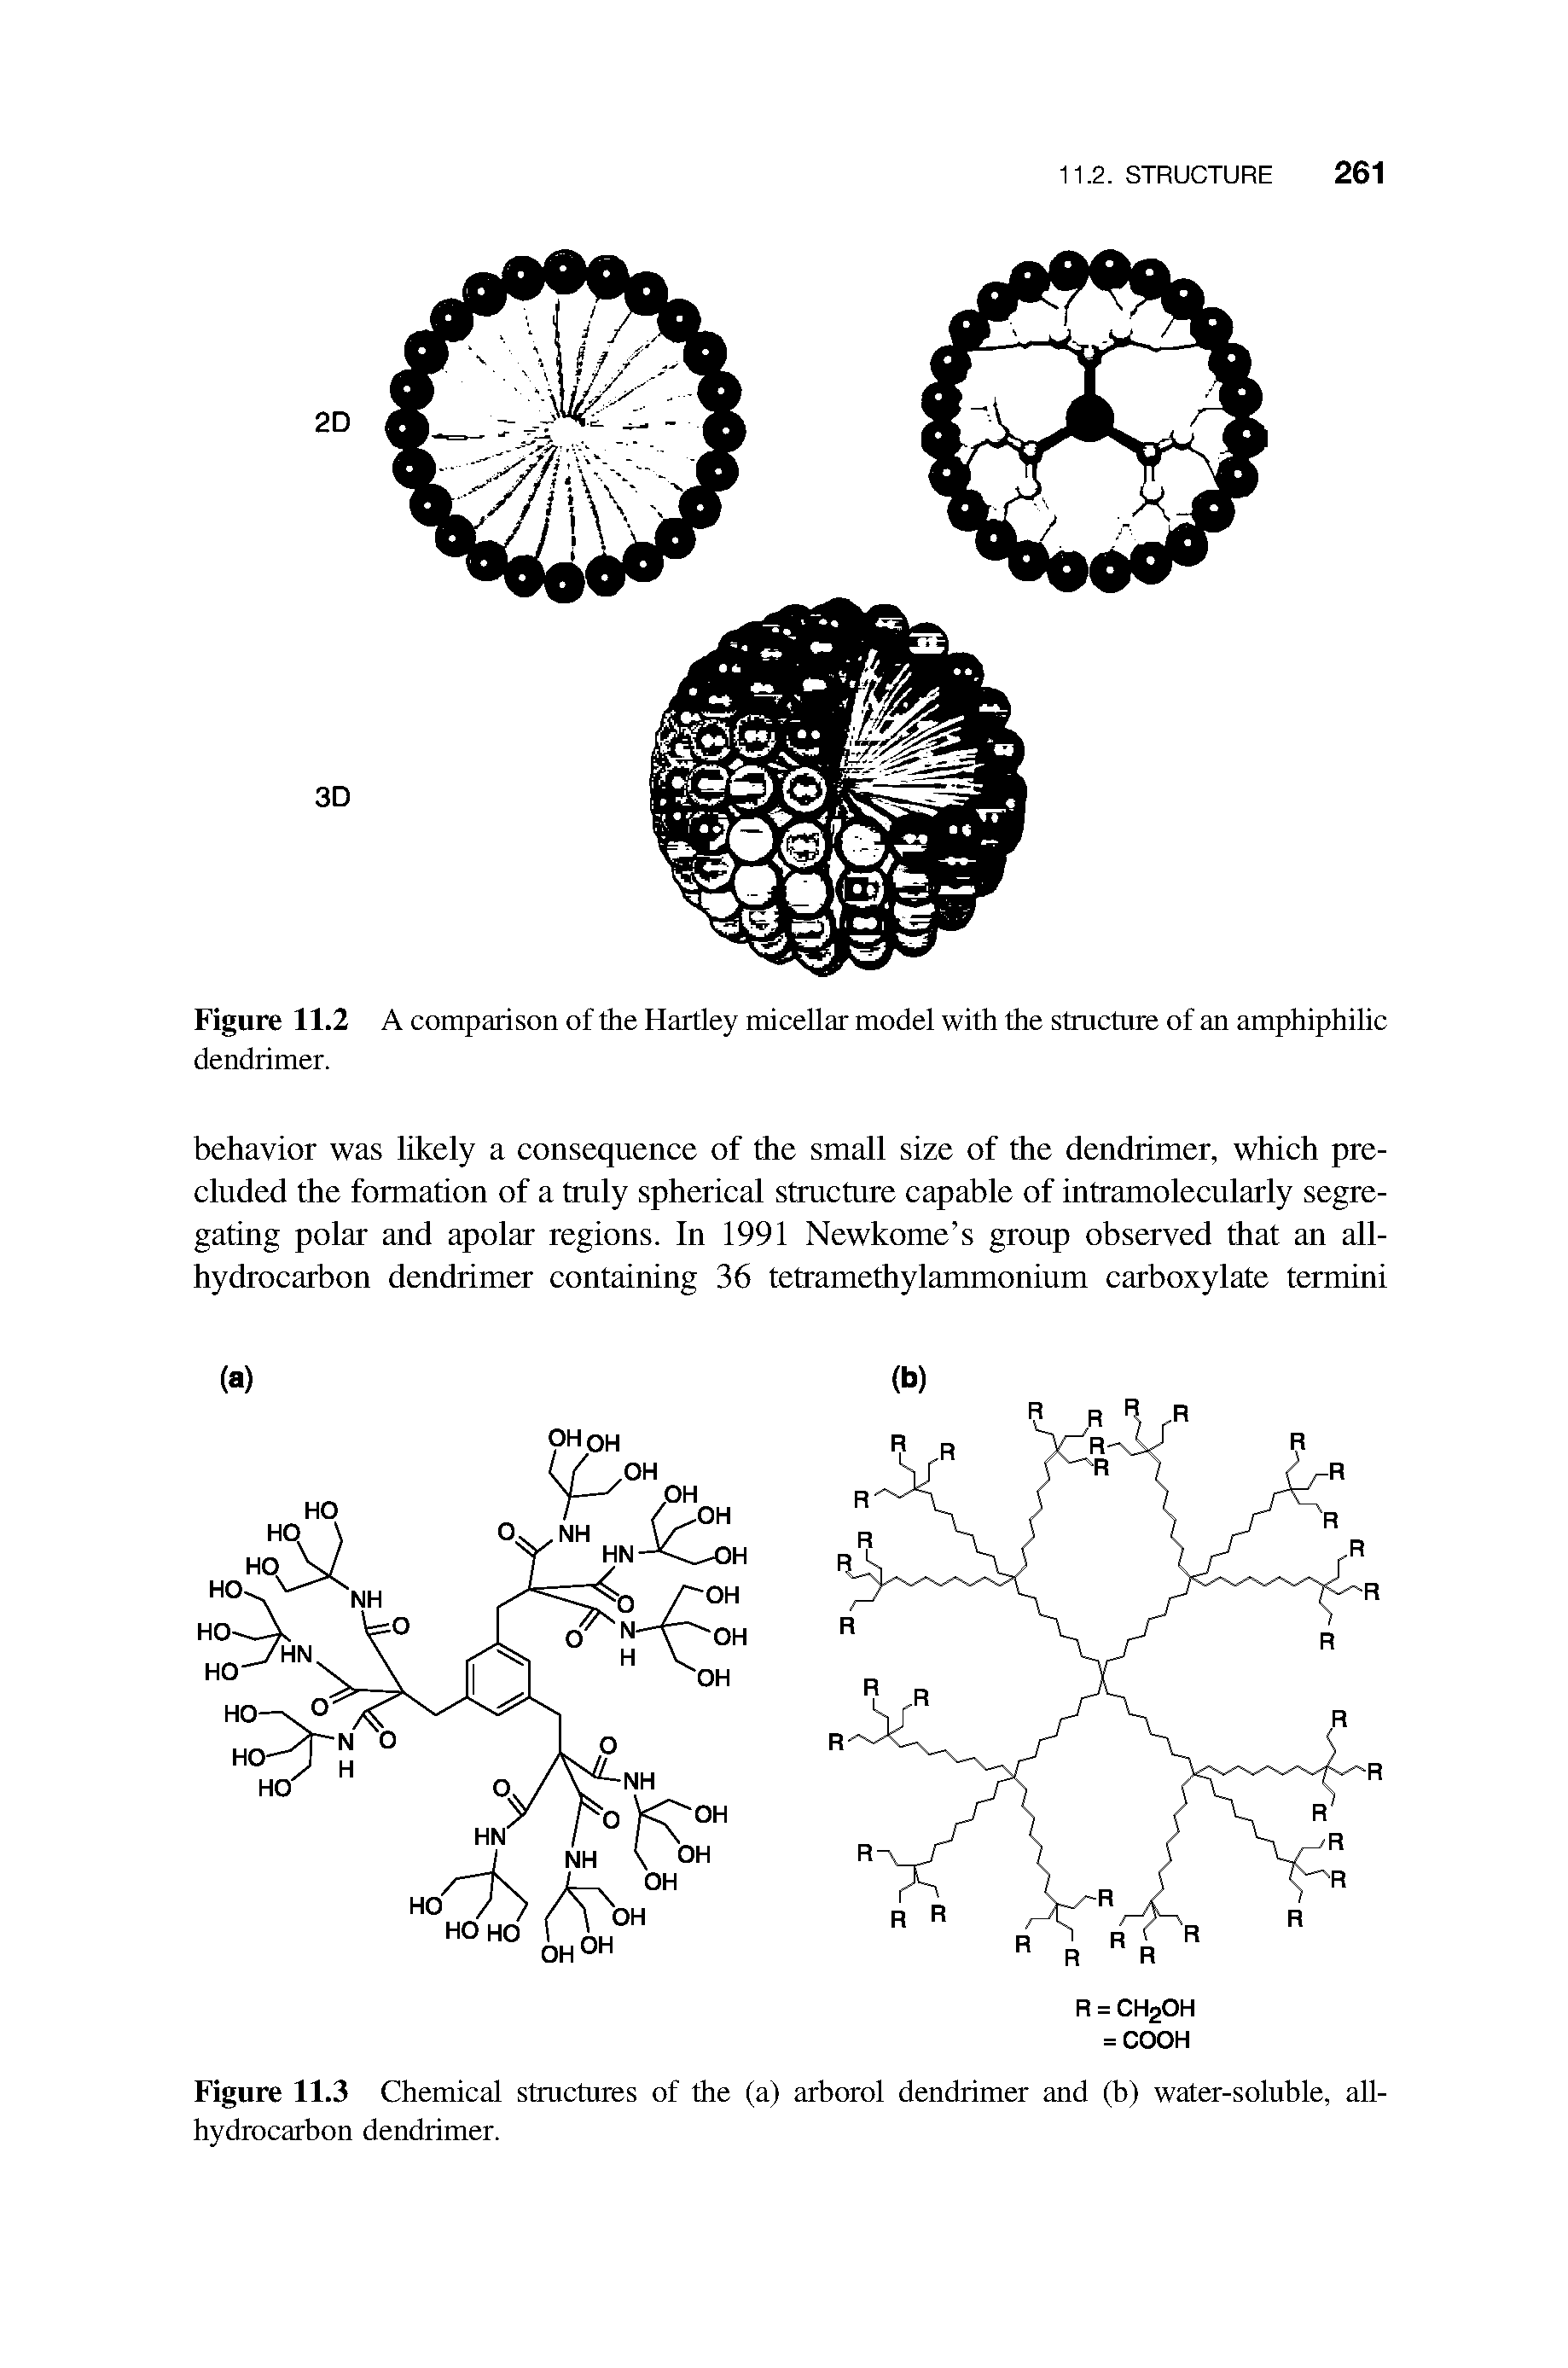 Figure 11.3 Chemical structures of the (a) arborol dendrimer and (b) water-soluble, allhydrocarbon dendrimer.